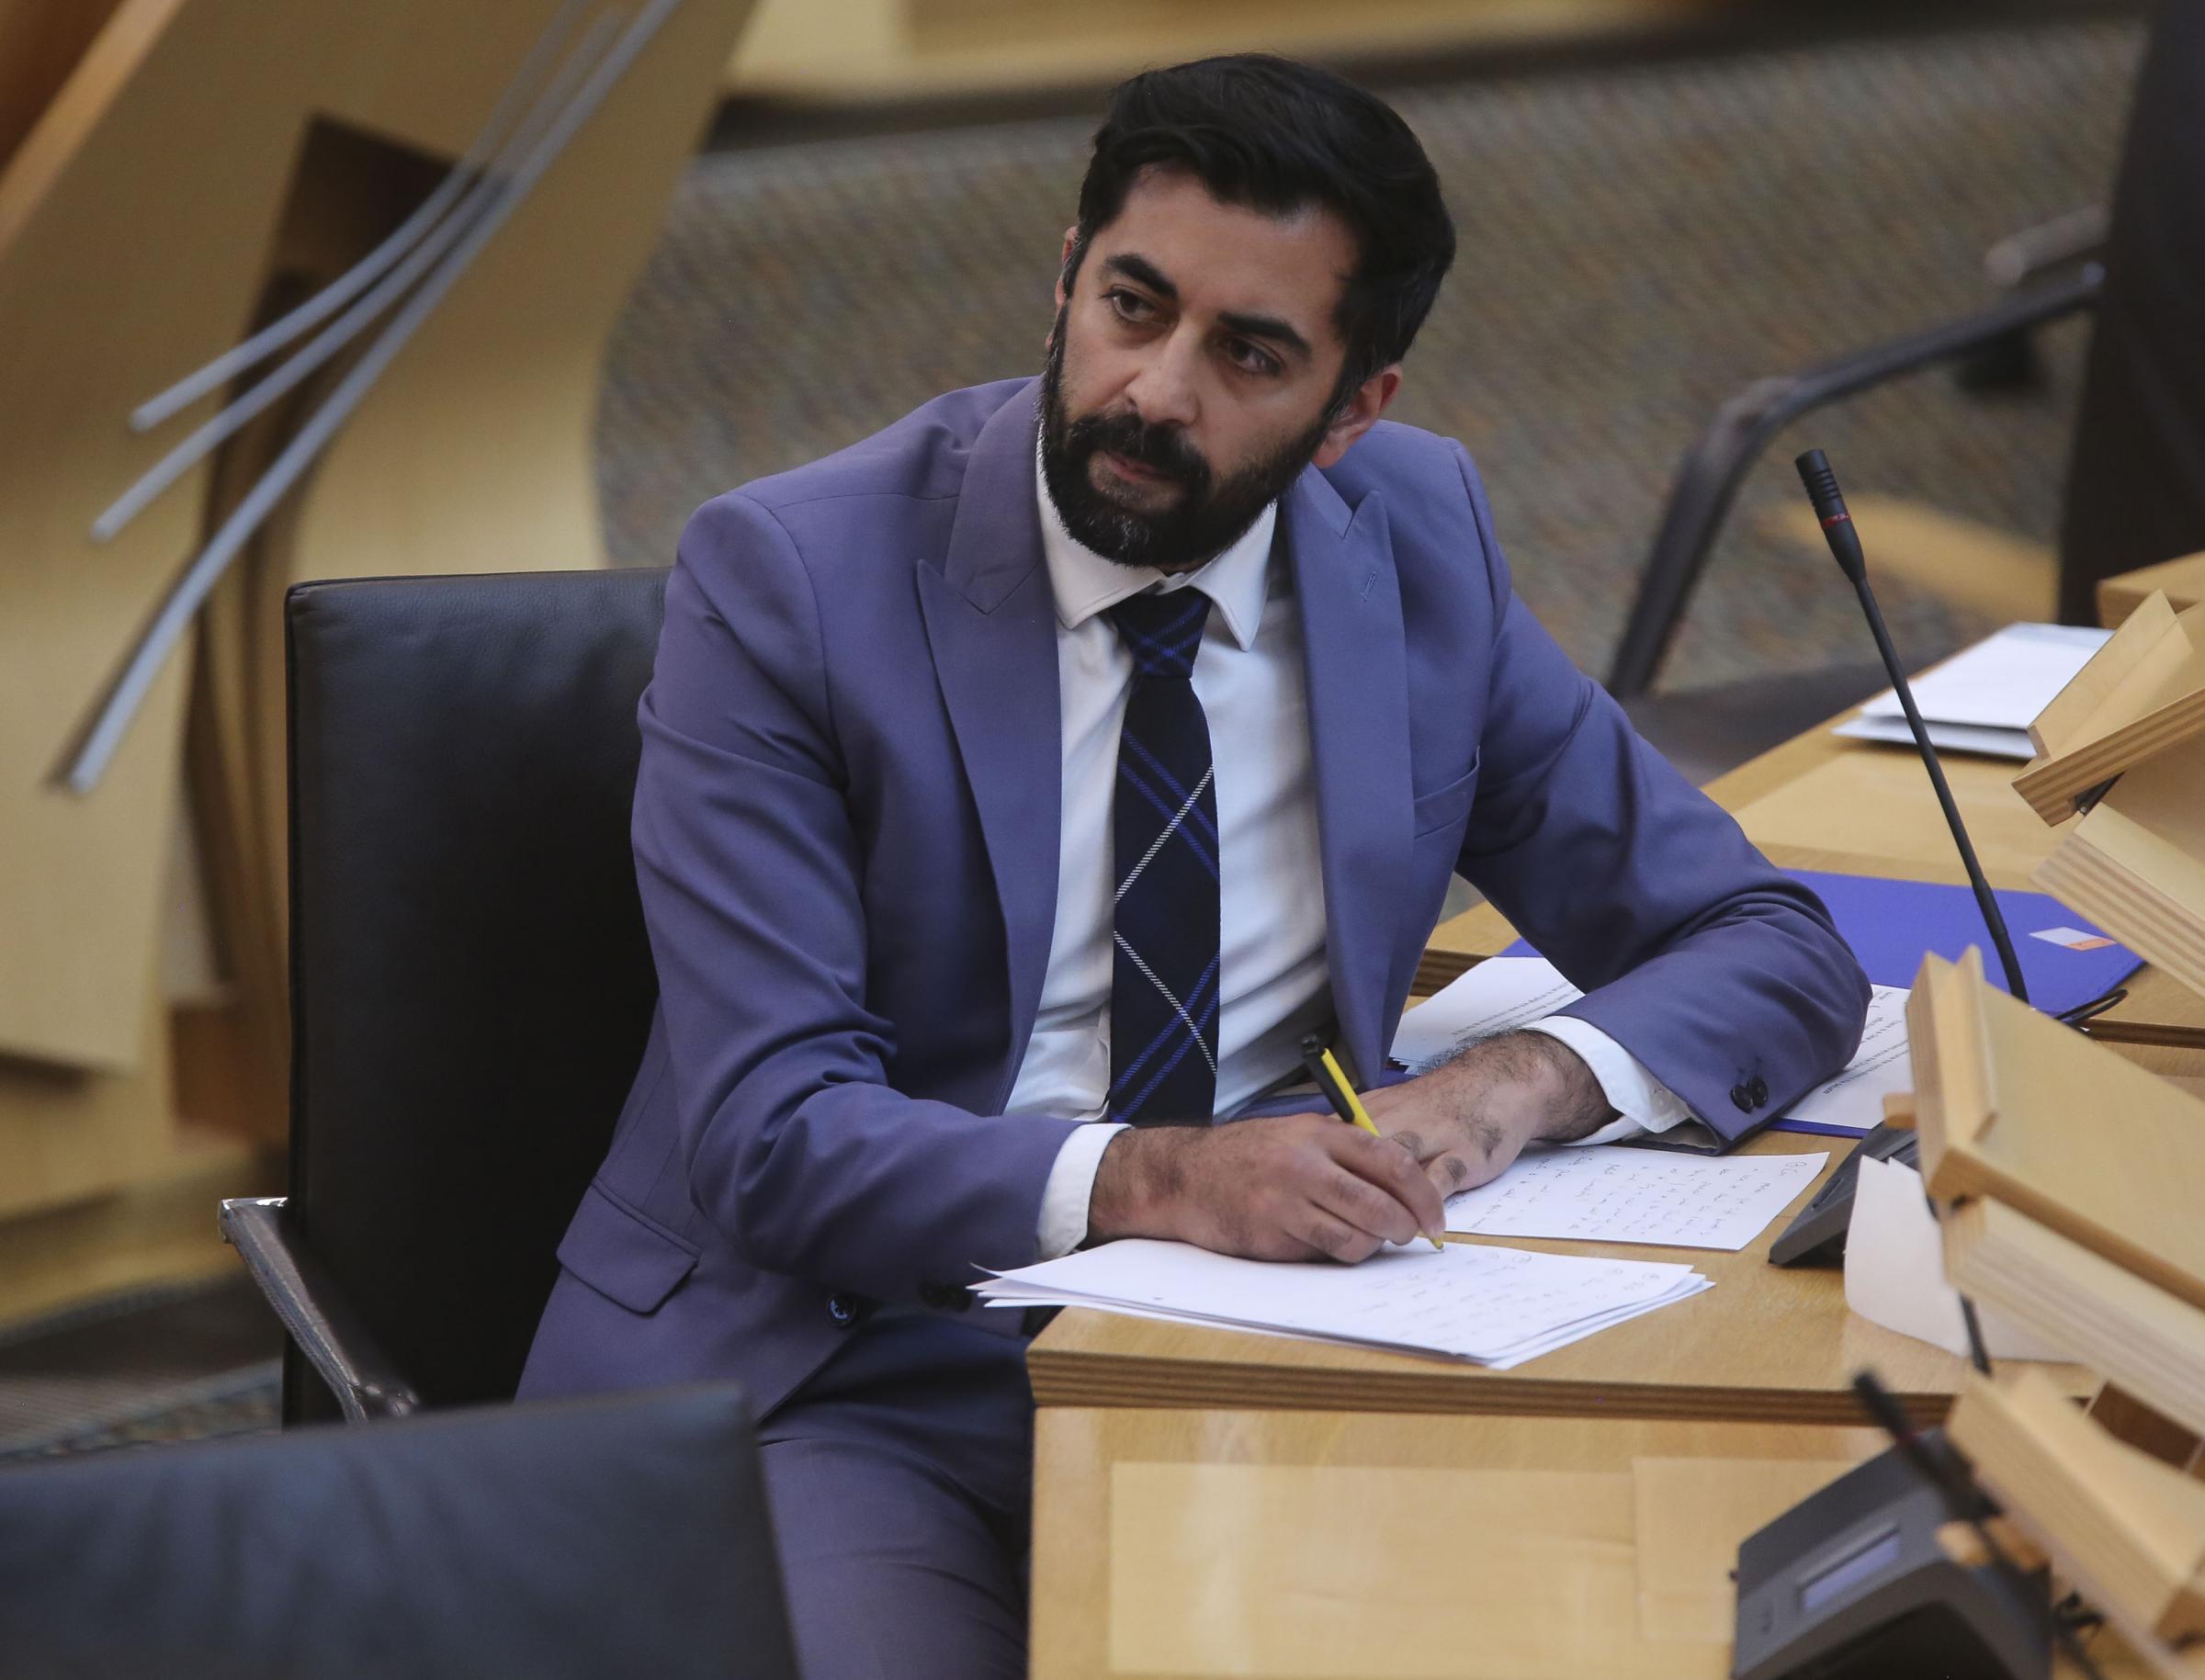 Humza Yousaf speaks out amid Israeli air strikes as family feels 'helpless' in Gaza